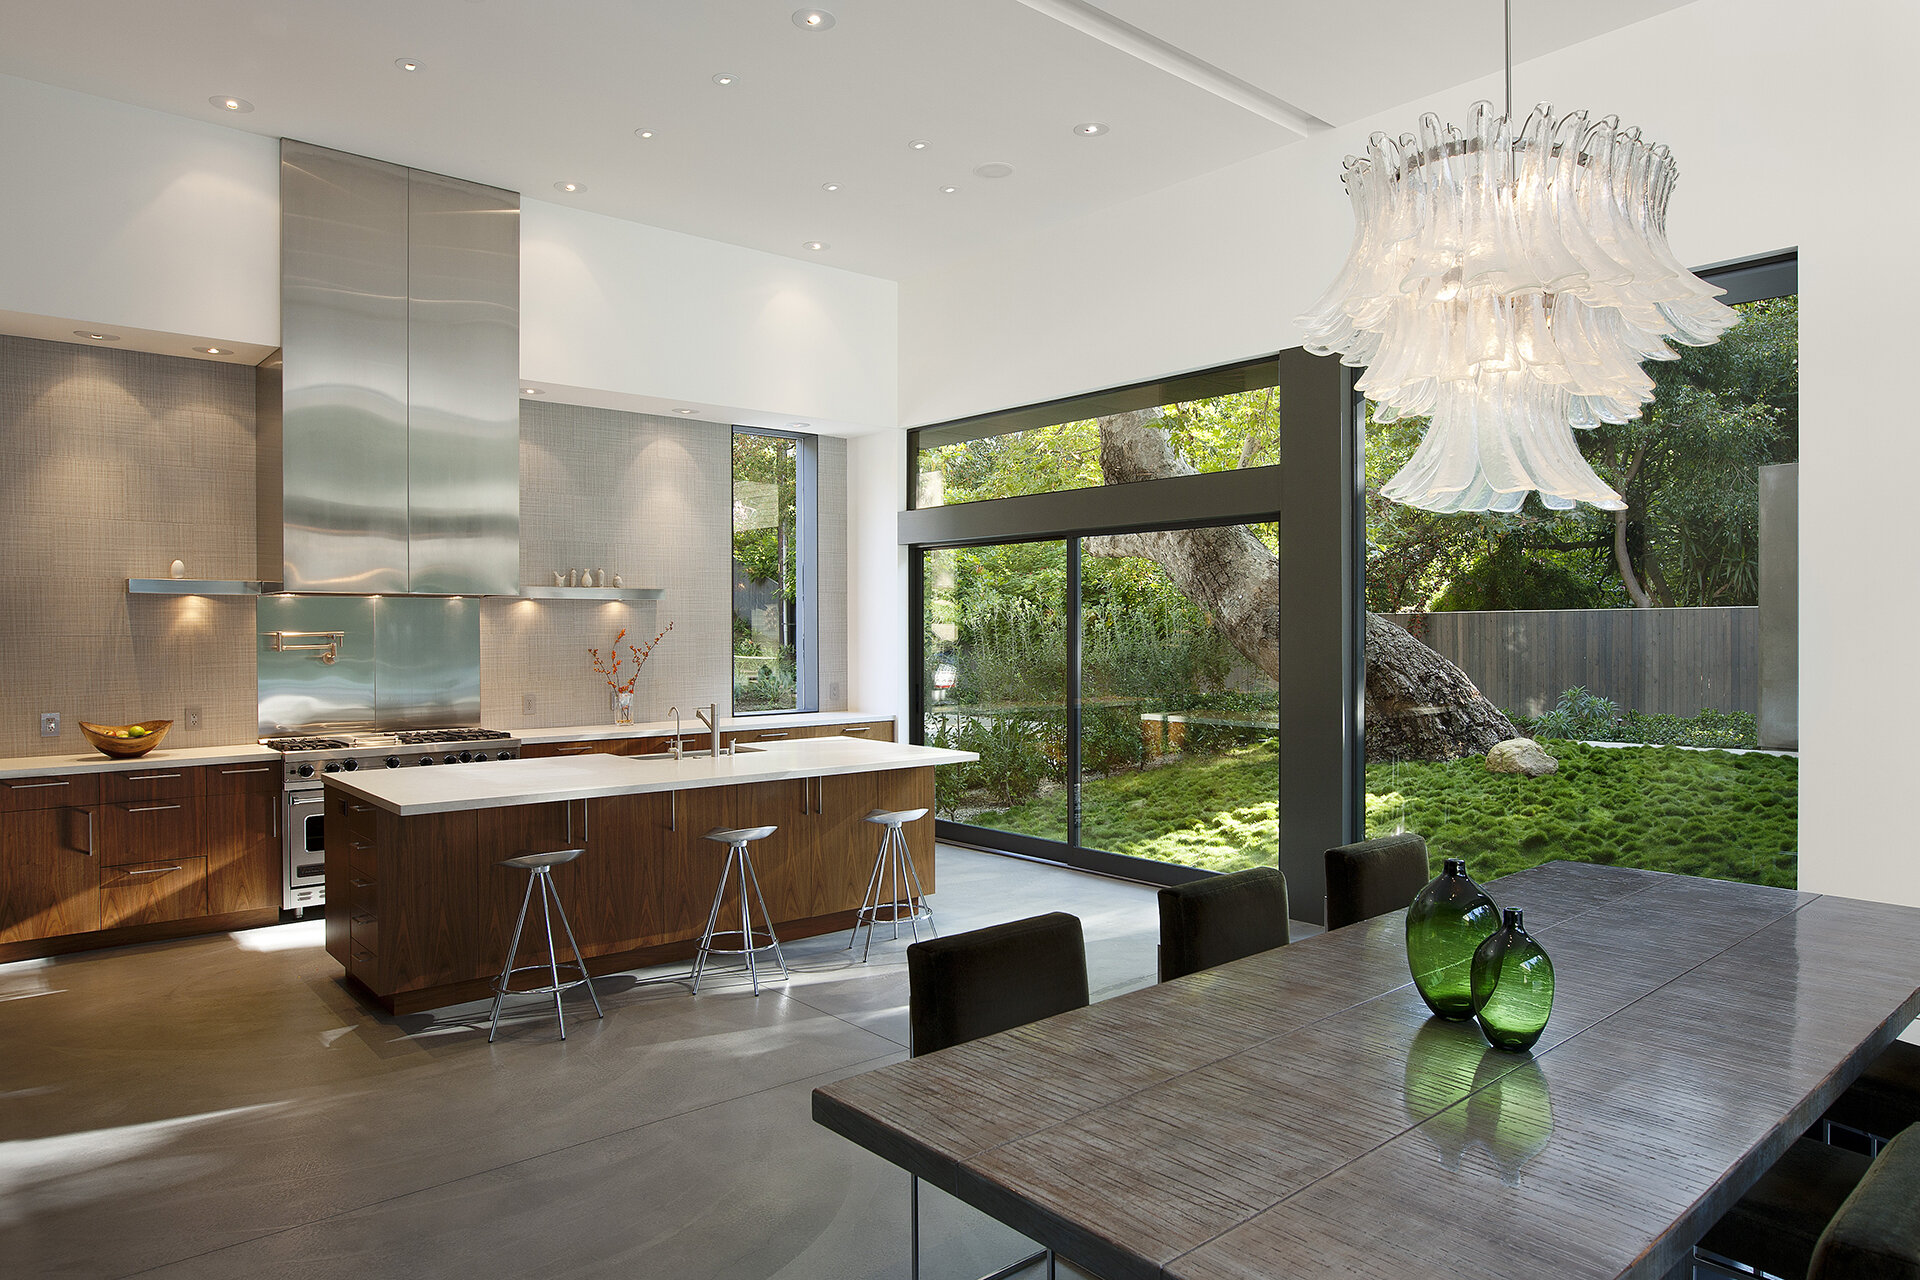  Top best luxury general contracting company modern home in a canyon neighborhood of Los Angeles featuring iconic design by architect Chu and Gooding featuring mid century style kitchen with stainless steel and wood cabinets and concrete floor.  